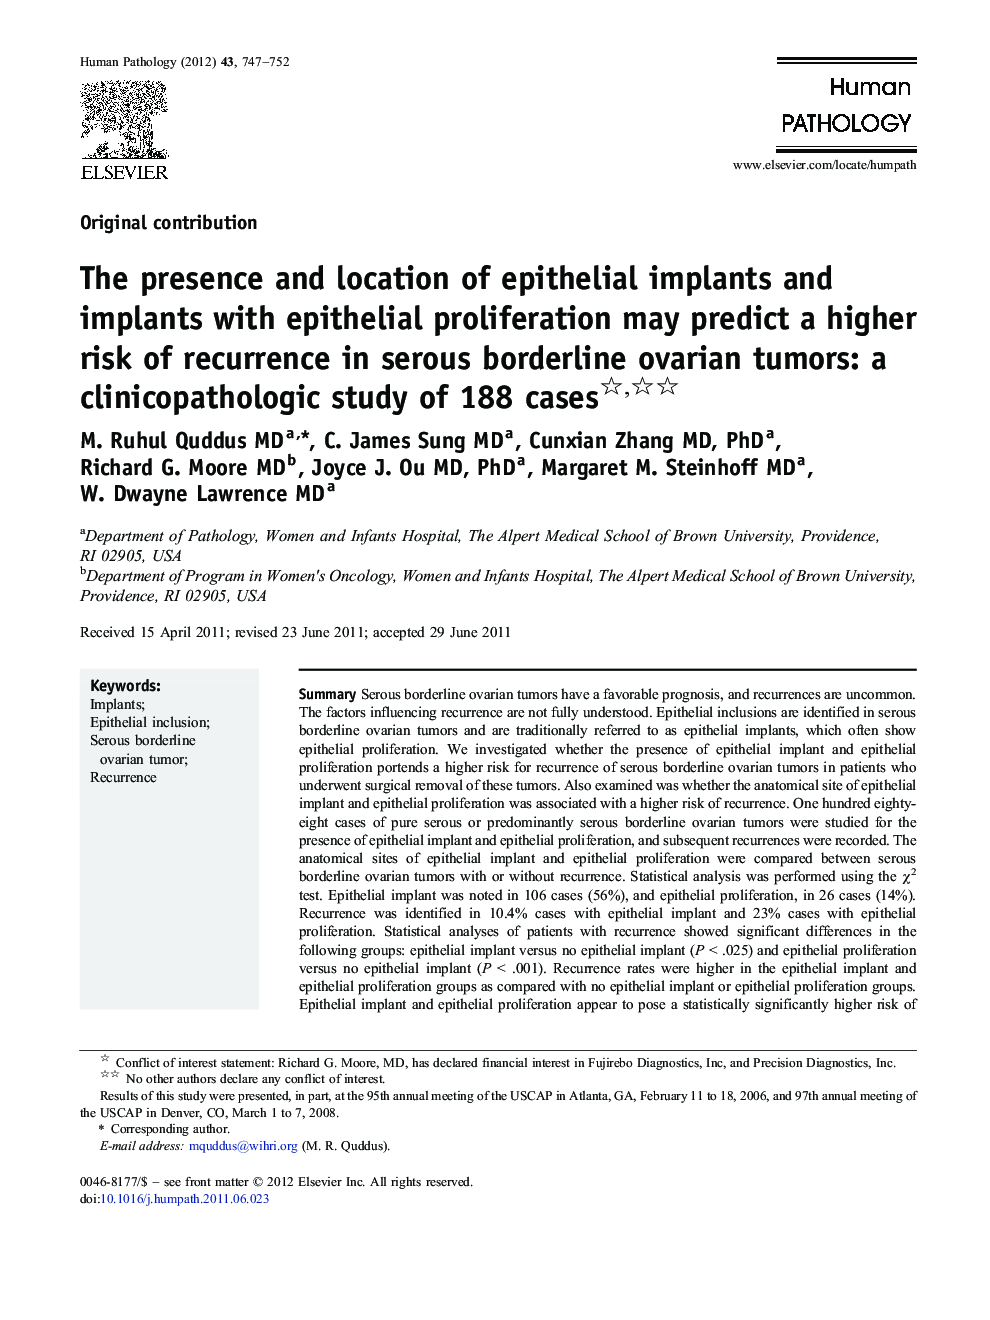 The presence and location of epithelial implants and implants with epithelial proliferation may predict a higher risk of recurrence in serous borderline ovarian tumors: a clinicopathologic study of 188 cases 